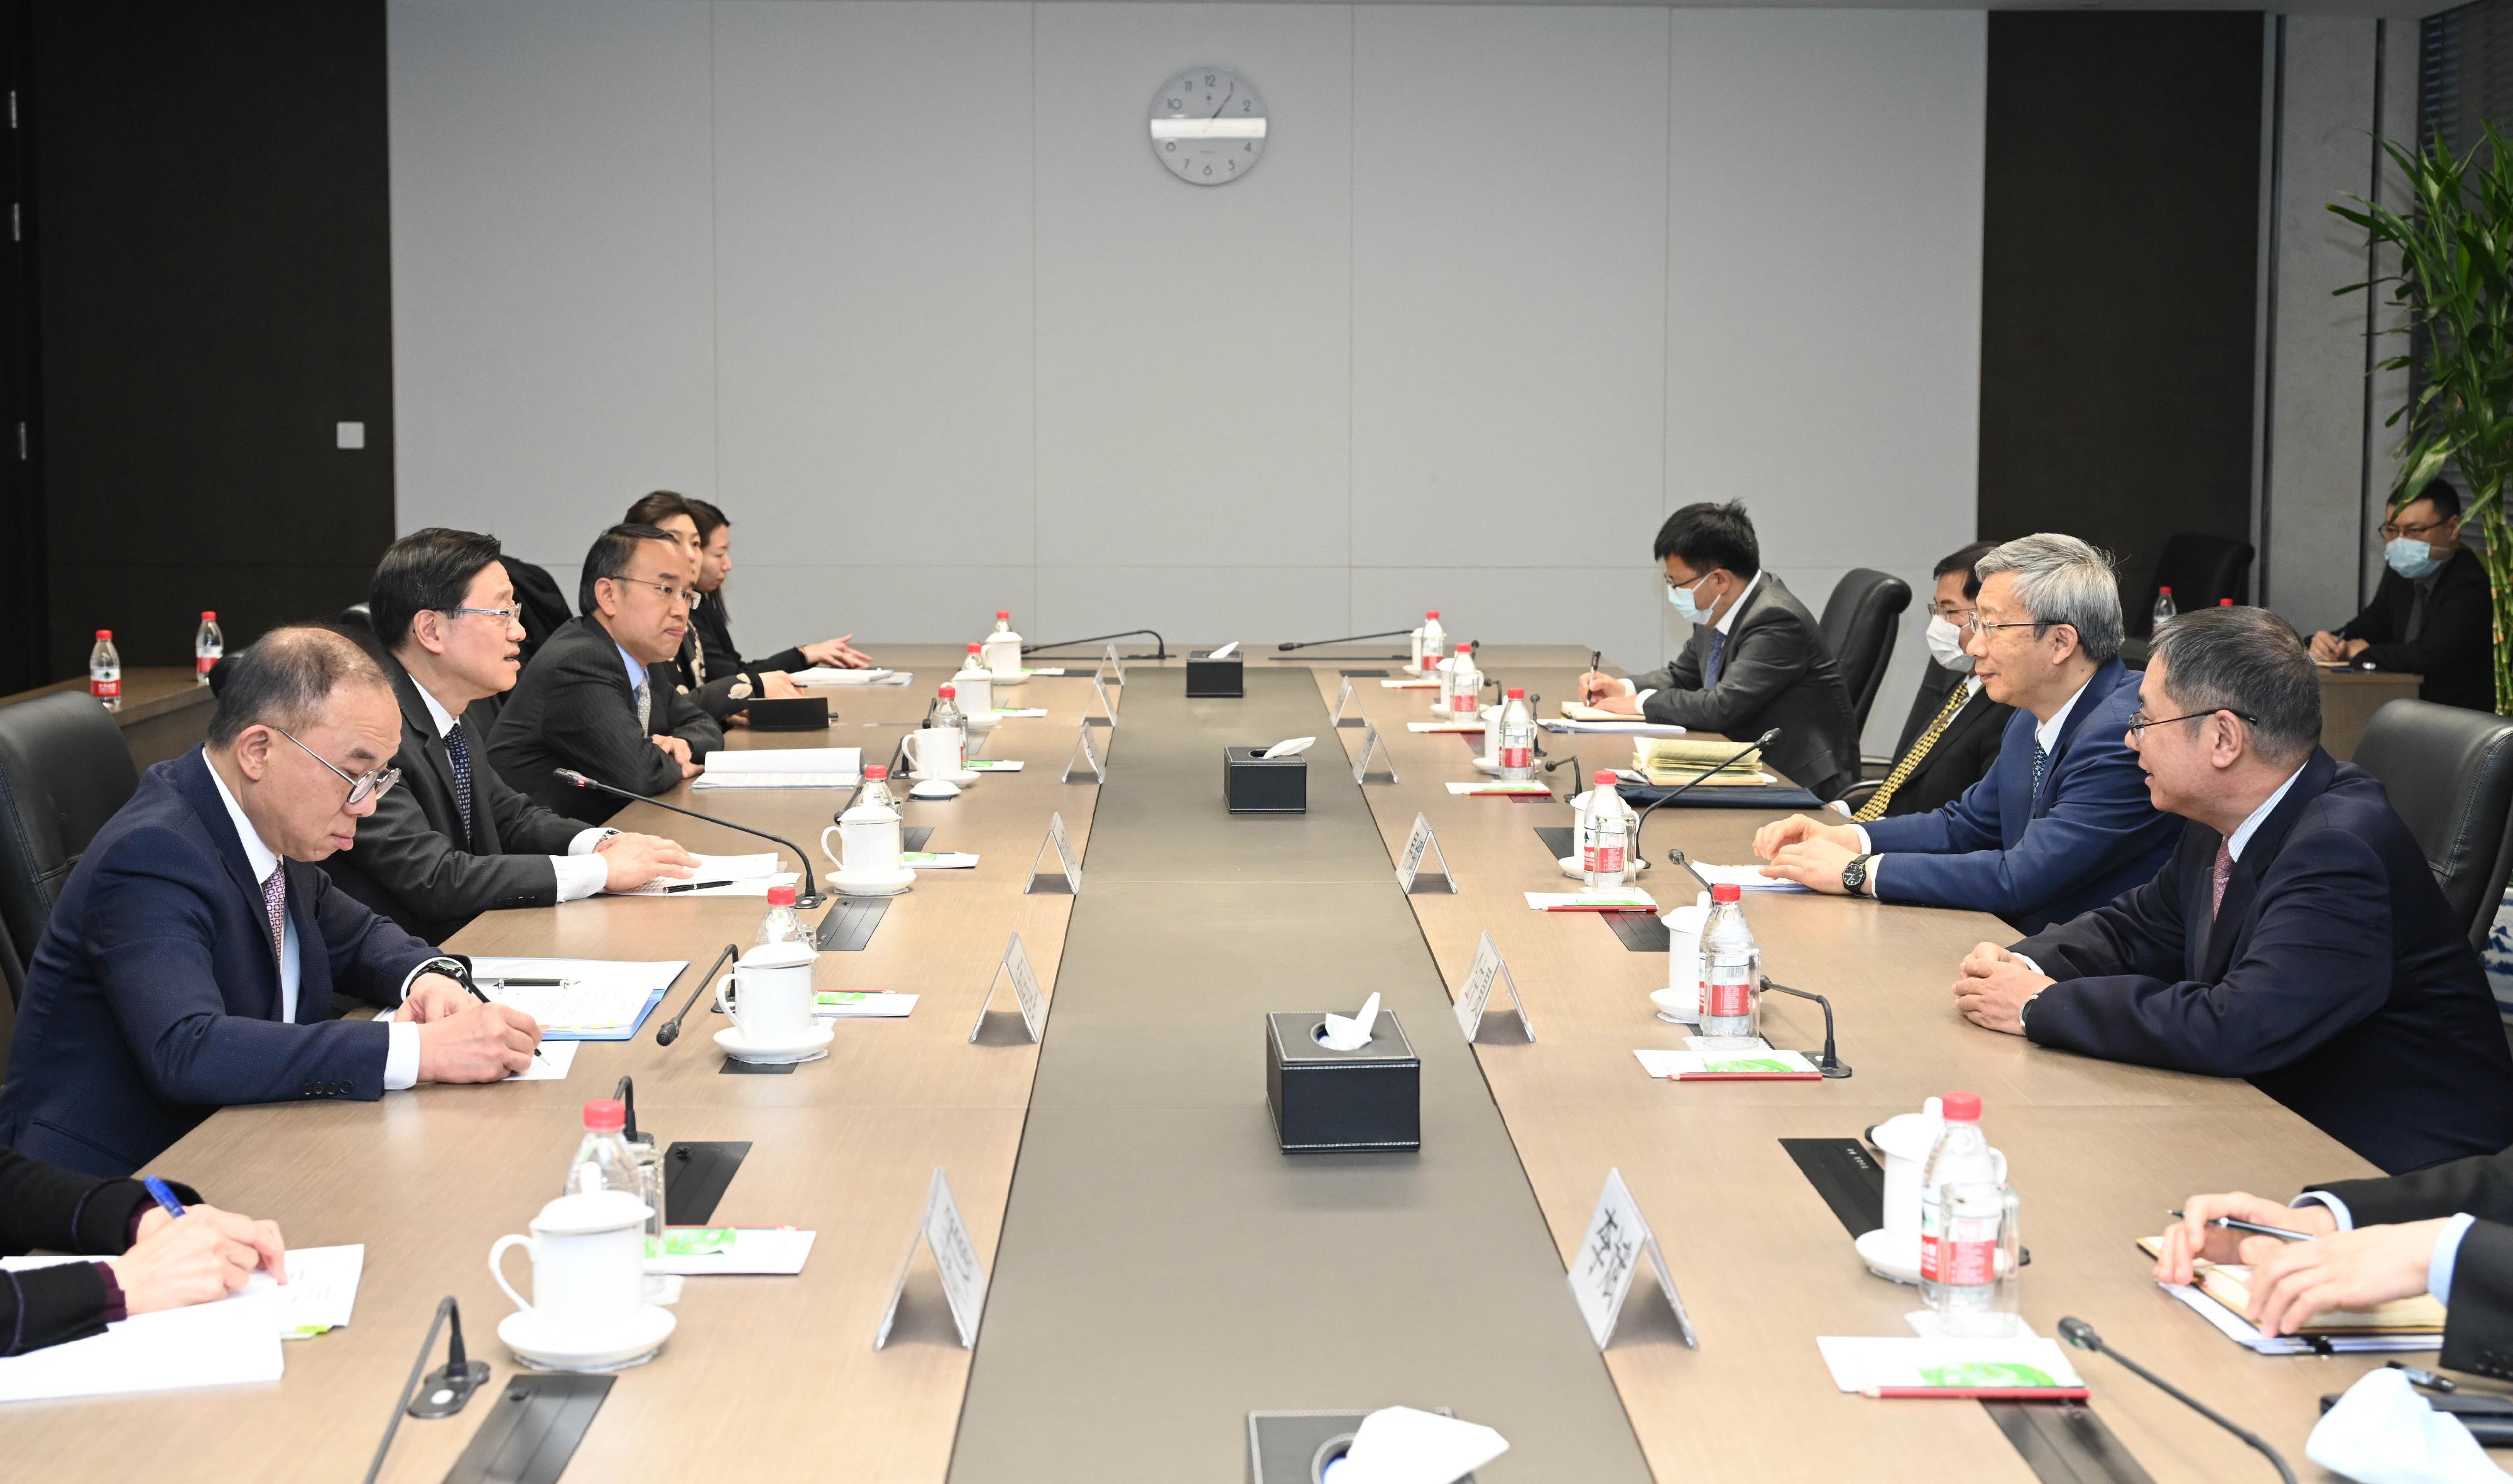 The Chief Executive, Mr John Lee (second left), meets with the Governor of the People's Bank of China, Mr Yi Gang (second right), in Beijing today (March 17). Also joining the meeting are the Secretary for Constitutional and Mainland Affairs, Mr Erick Tsang Kwok-wai (first left), and the Secretary for Financial Services and the Treasury, Mr Christopher Hui (third left).